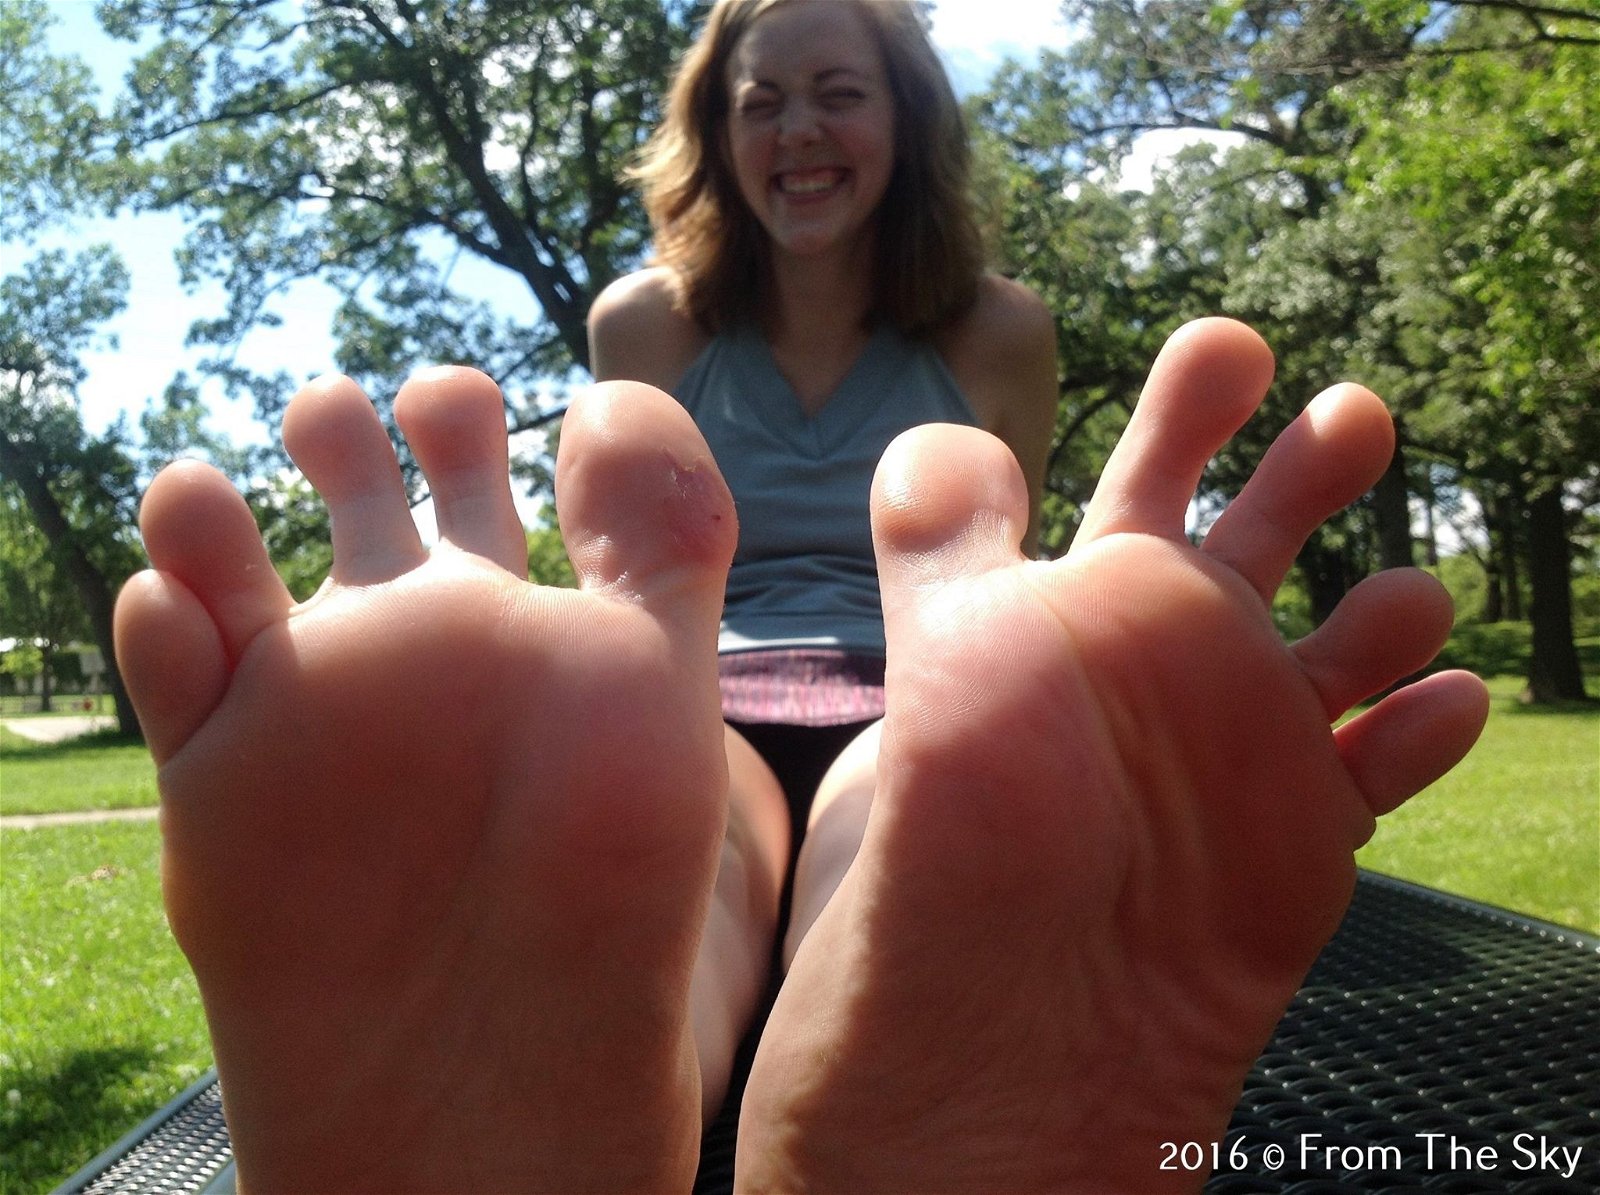 Photo by Mr.Spreads with the username @Soleman,  May 21, 2019 at 1:08 AM. The post is about the topic Toes and the text says 'Please show some love for the soles. #feet #soles #longtoes #women #big #bigfeet #spread #spreads #beautifulwomen #toes #arches #smell #bigsoles #widespread 

I do not own this content'